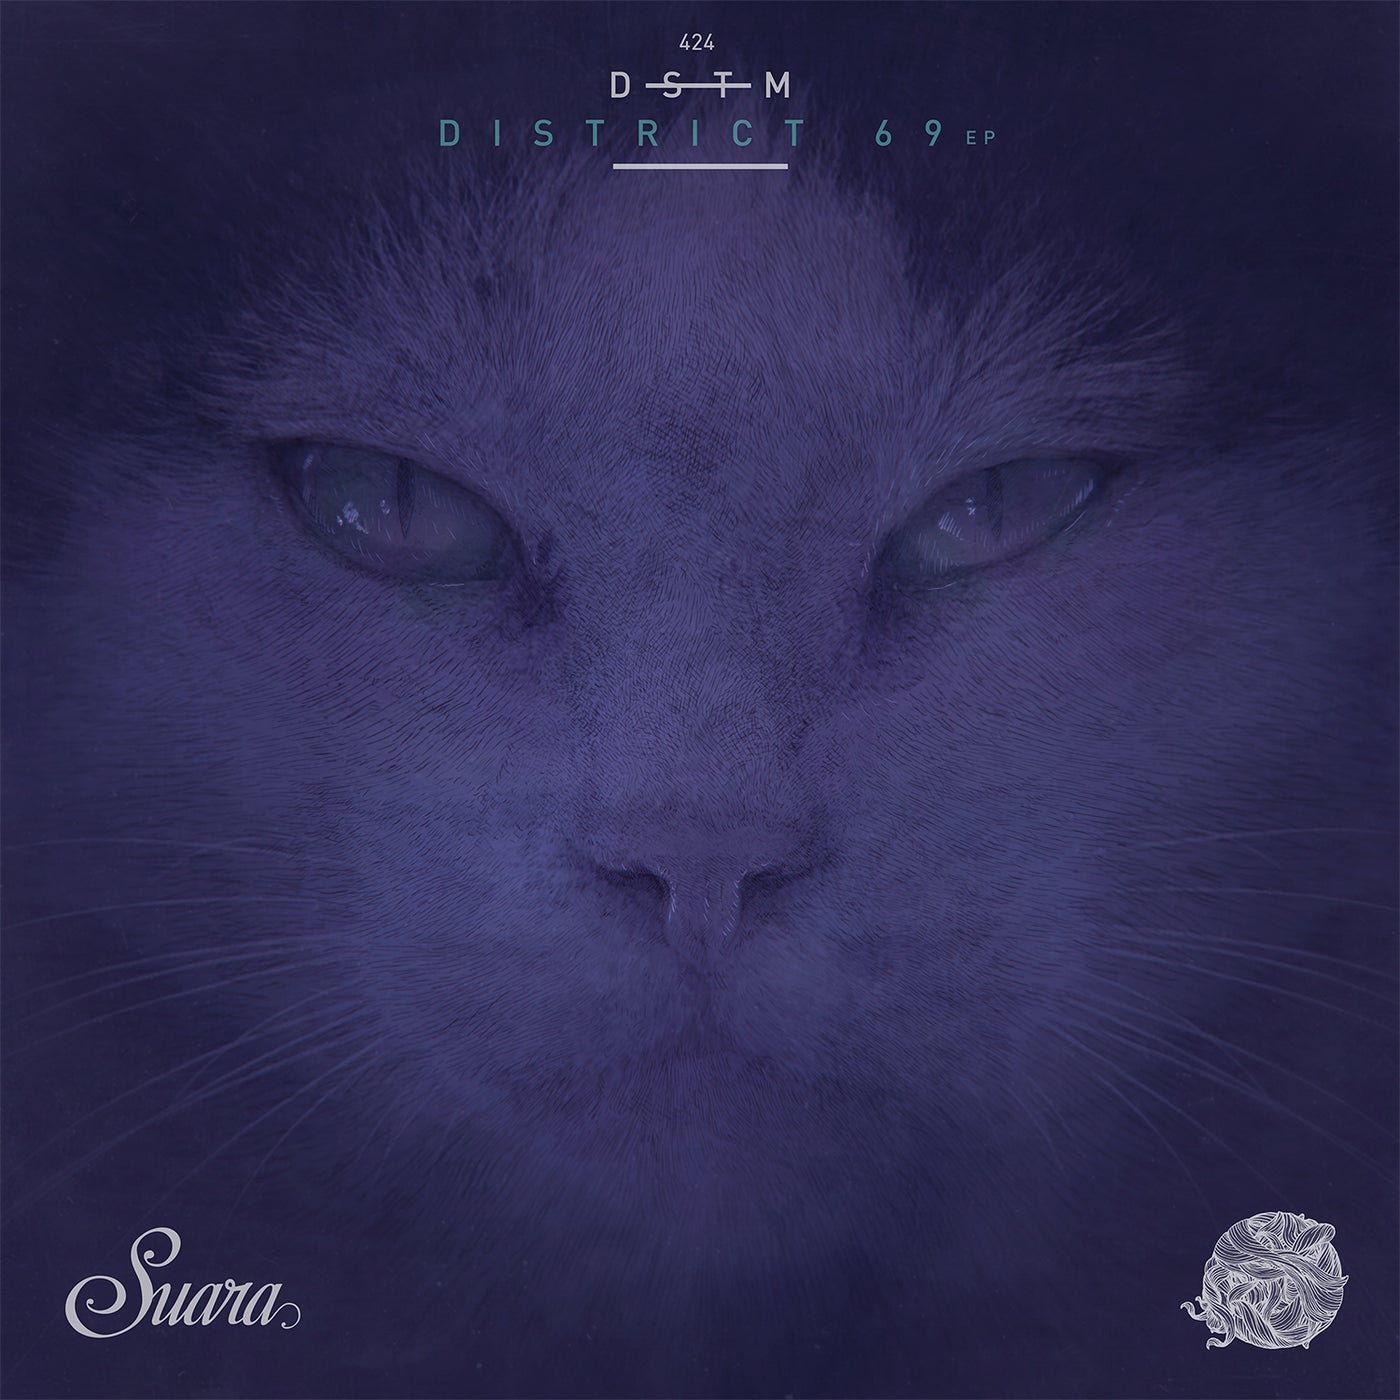 image cover: Dstm - District 69 EP / SUARA424